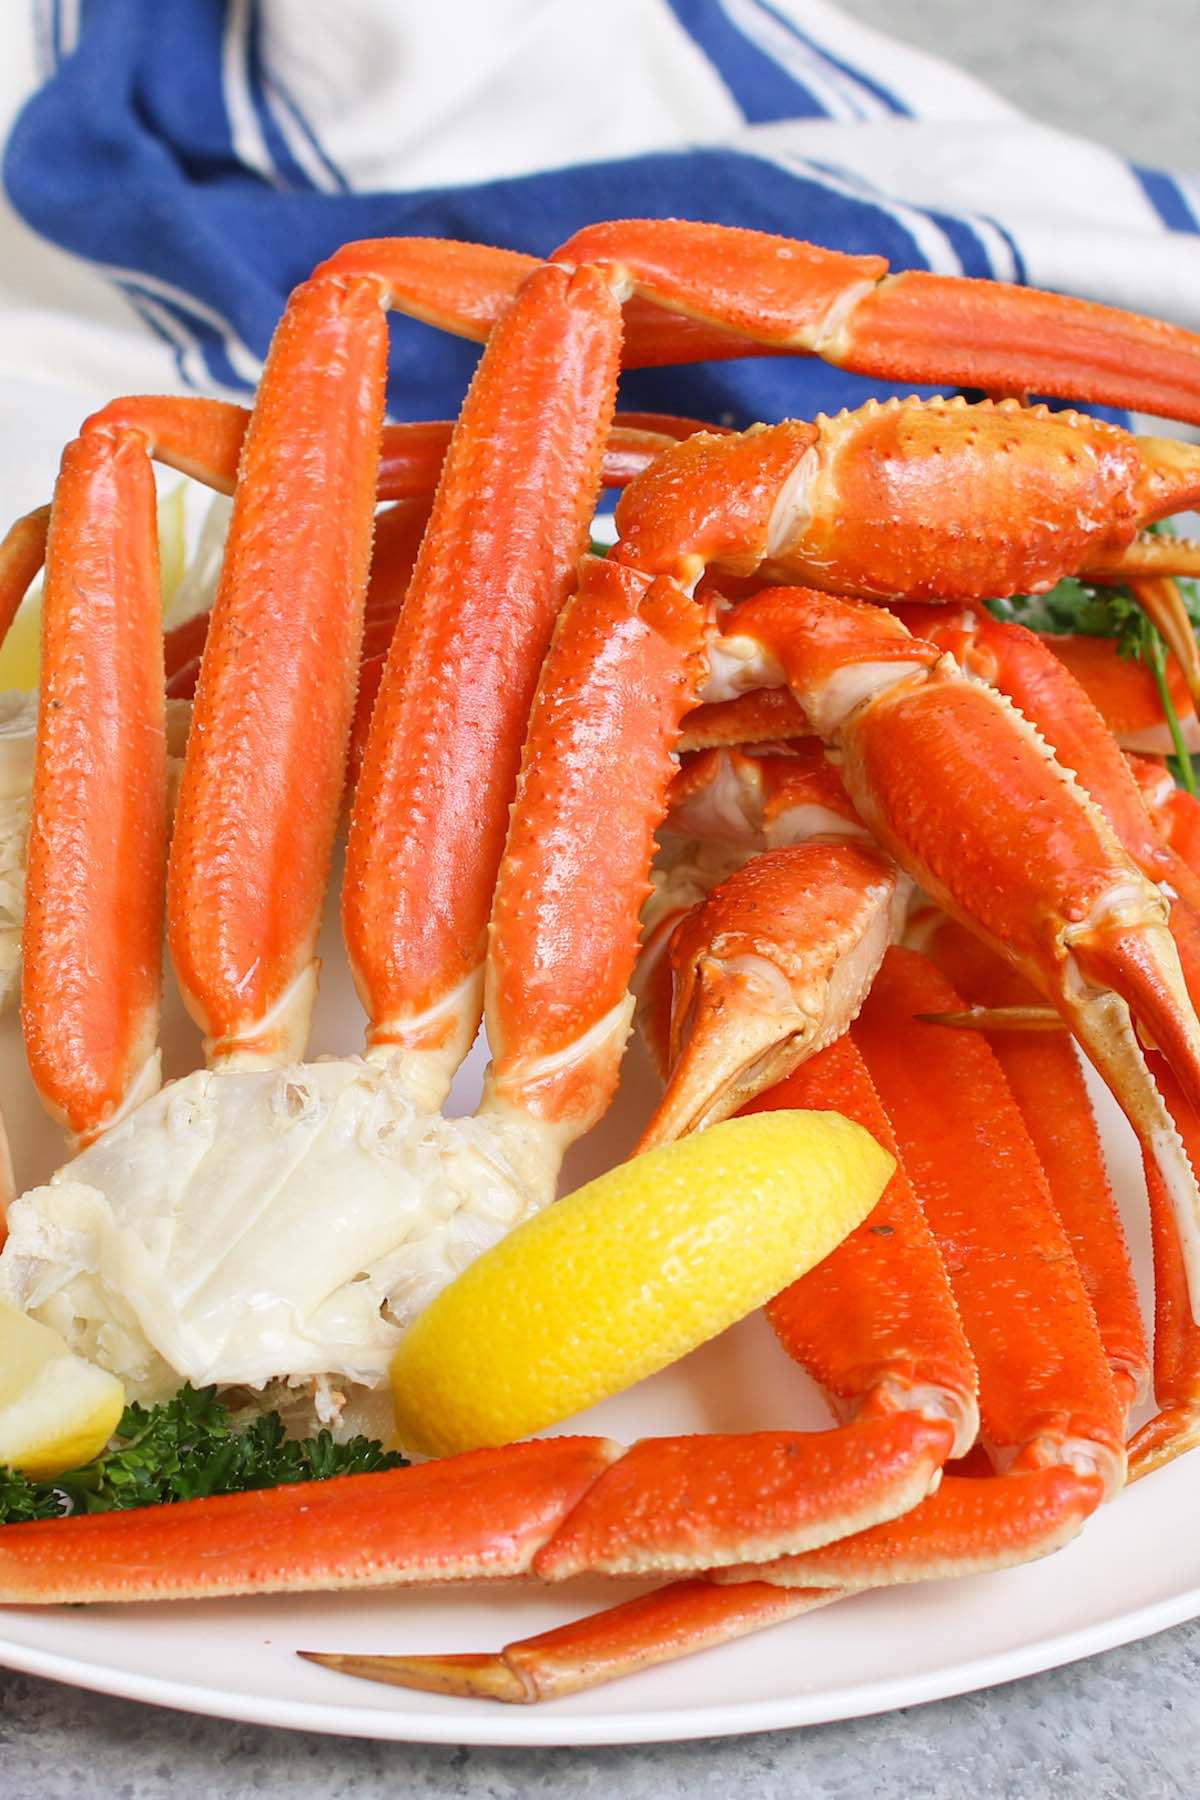 Learn how to cook crab legs for a delicious meal bursting with seafood flavors! Whether you’re using frozen king crab or snow crab legs,  follow this essential step-by-step guide on how to easily cook them in just 15 minutes by steaming, boiling, baking or grilling.